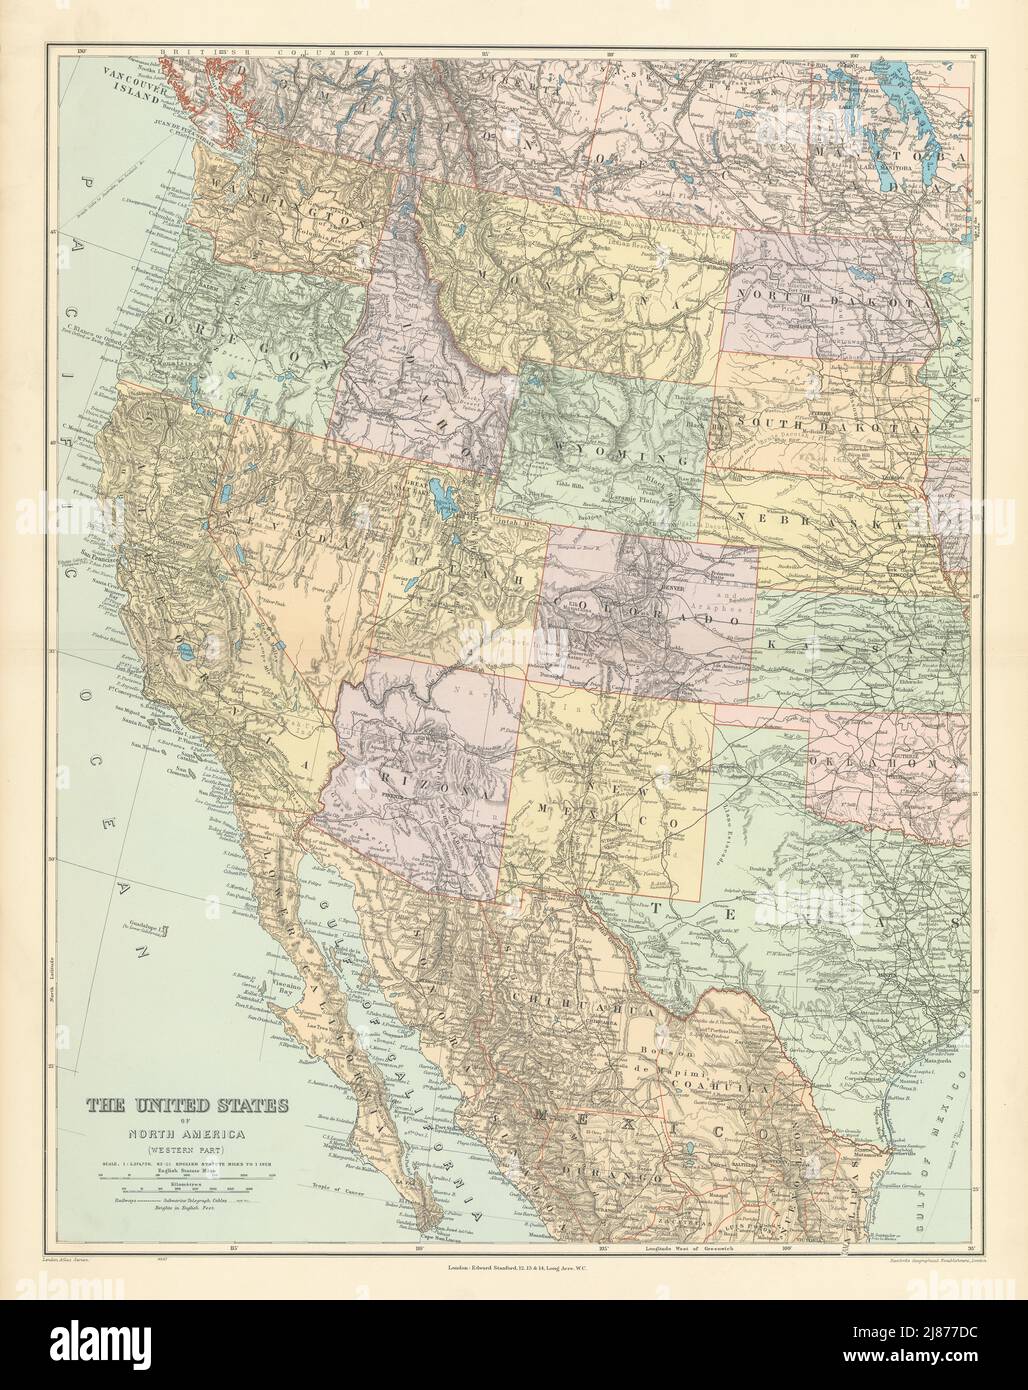 The United States of North America, Western part. USA. 69x54cm STANFORD 1904 map Stock Photo